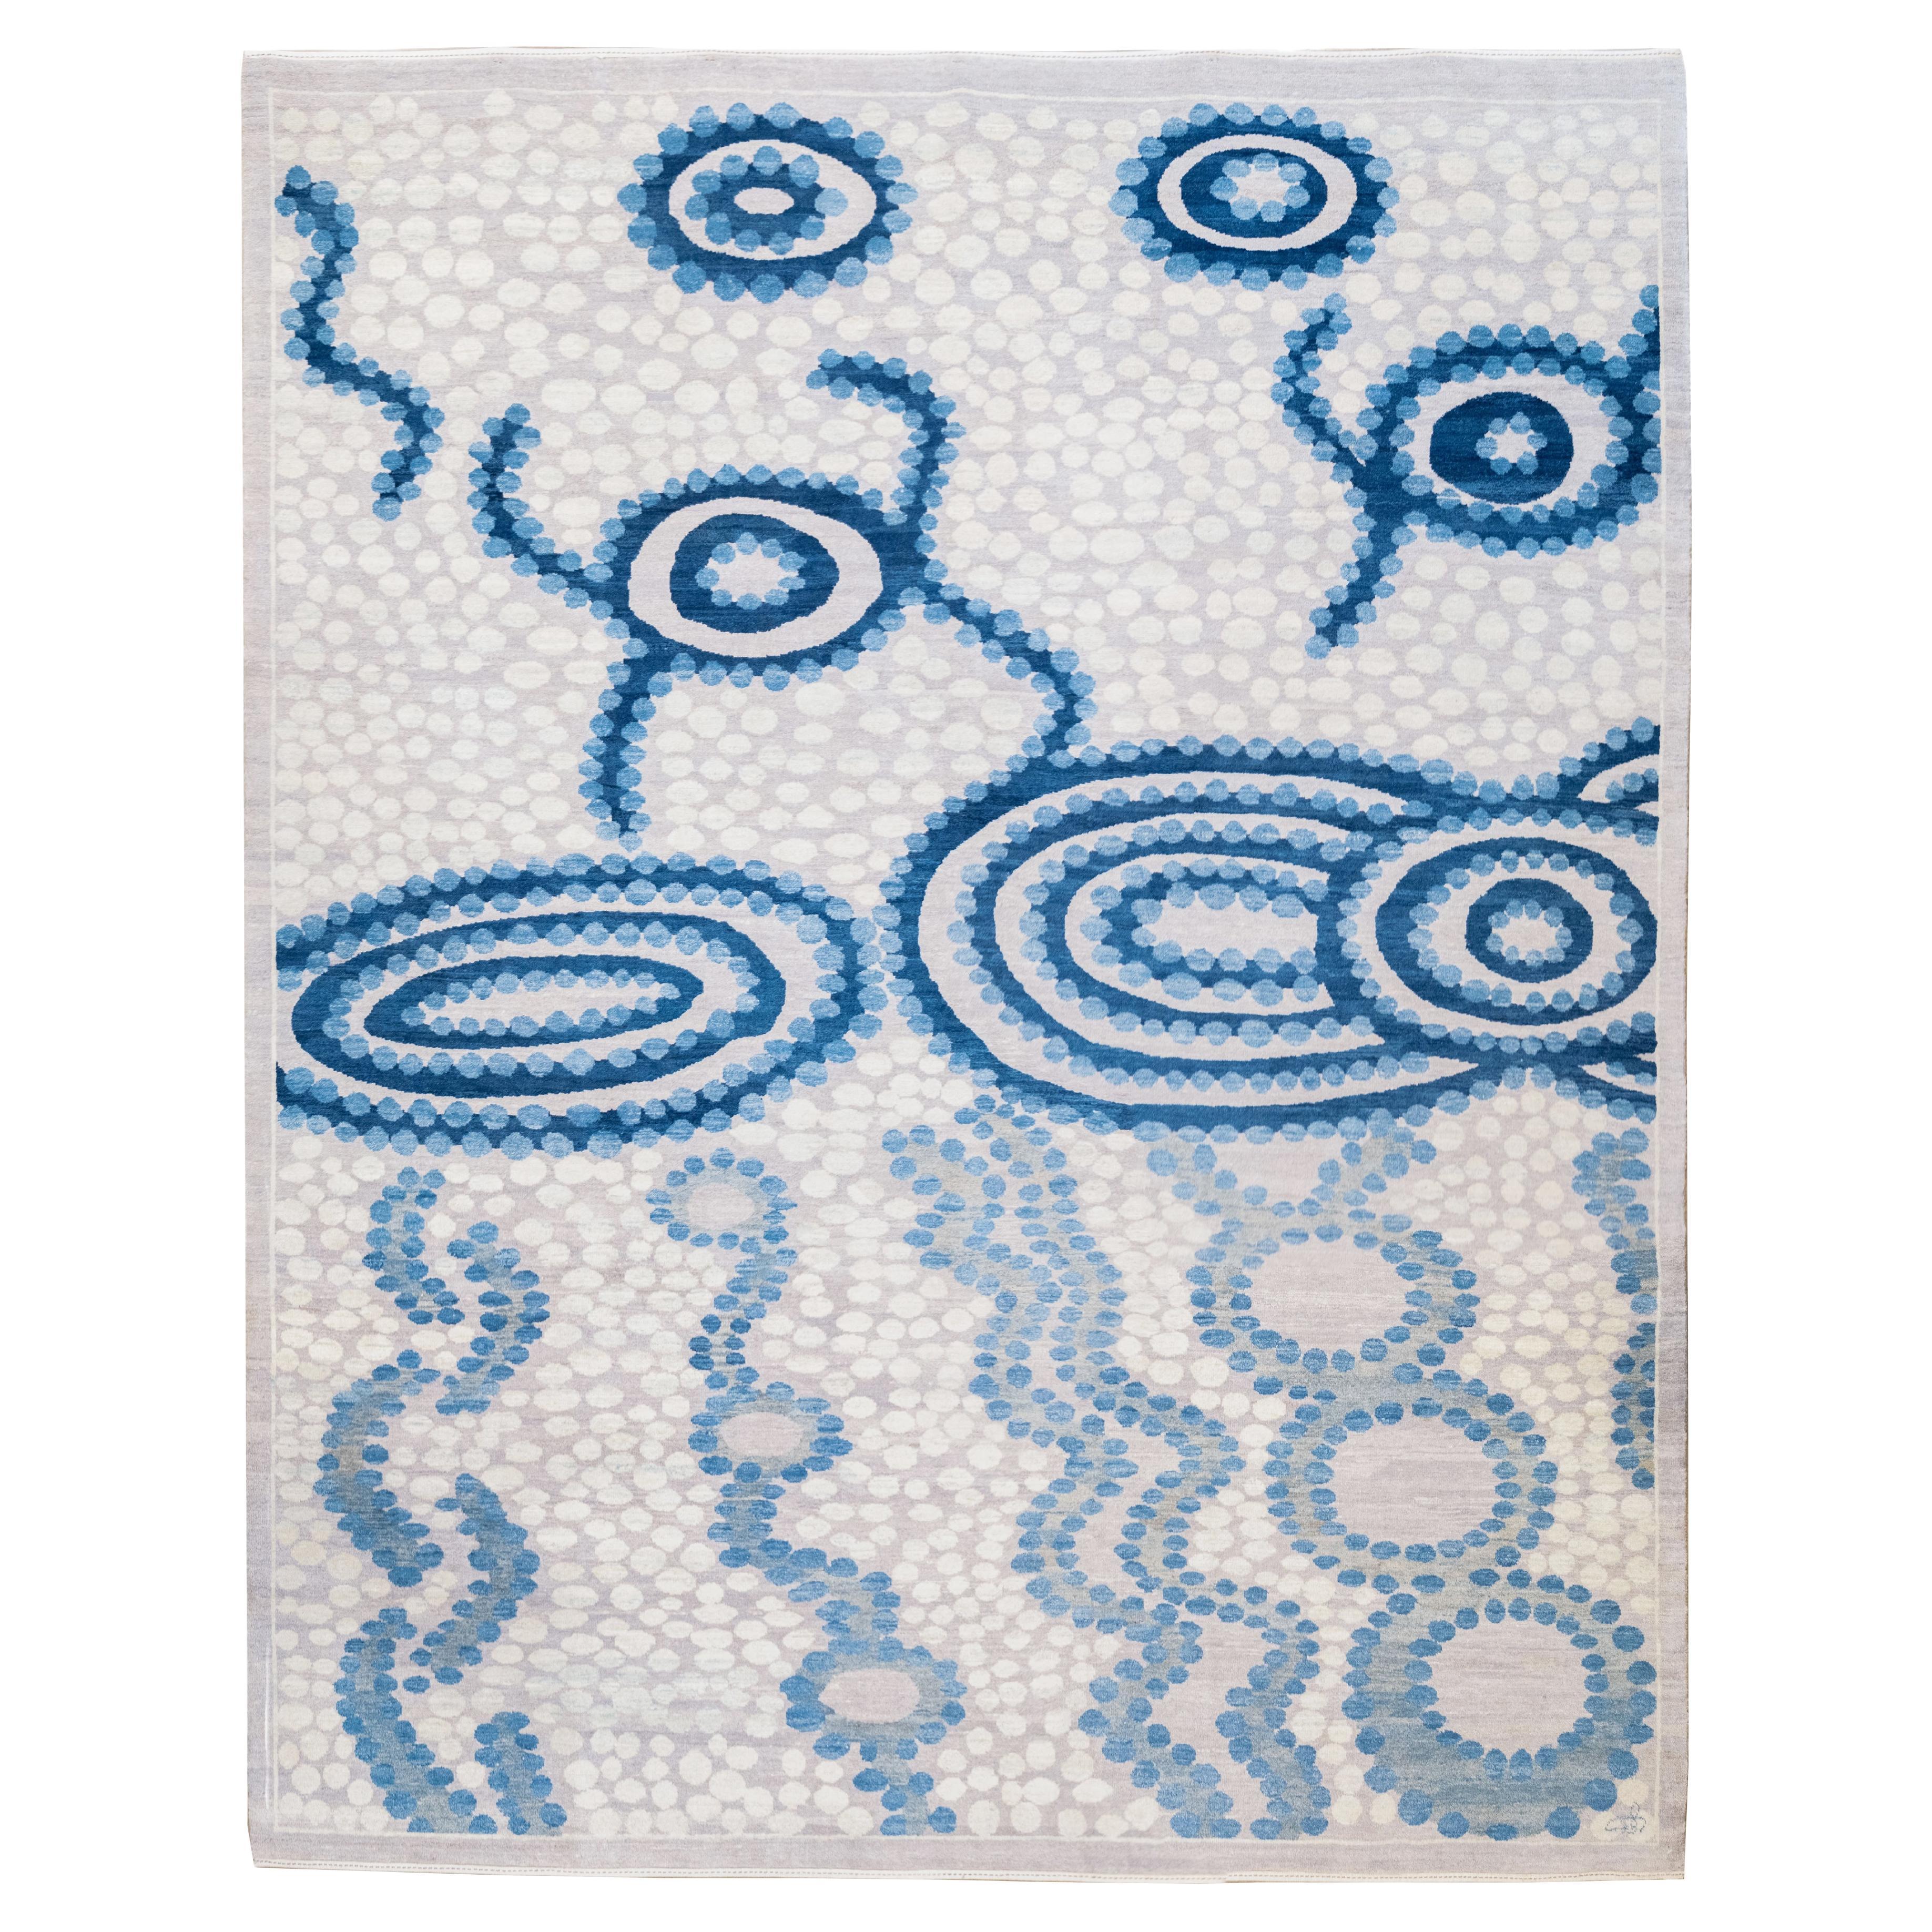 Blue and Cream Wool Modern Persian Carpet, Hand-Knotted, 8' x 10' For Sale